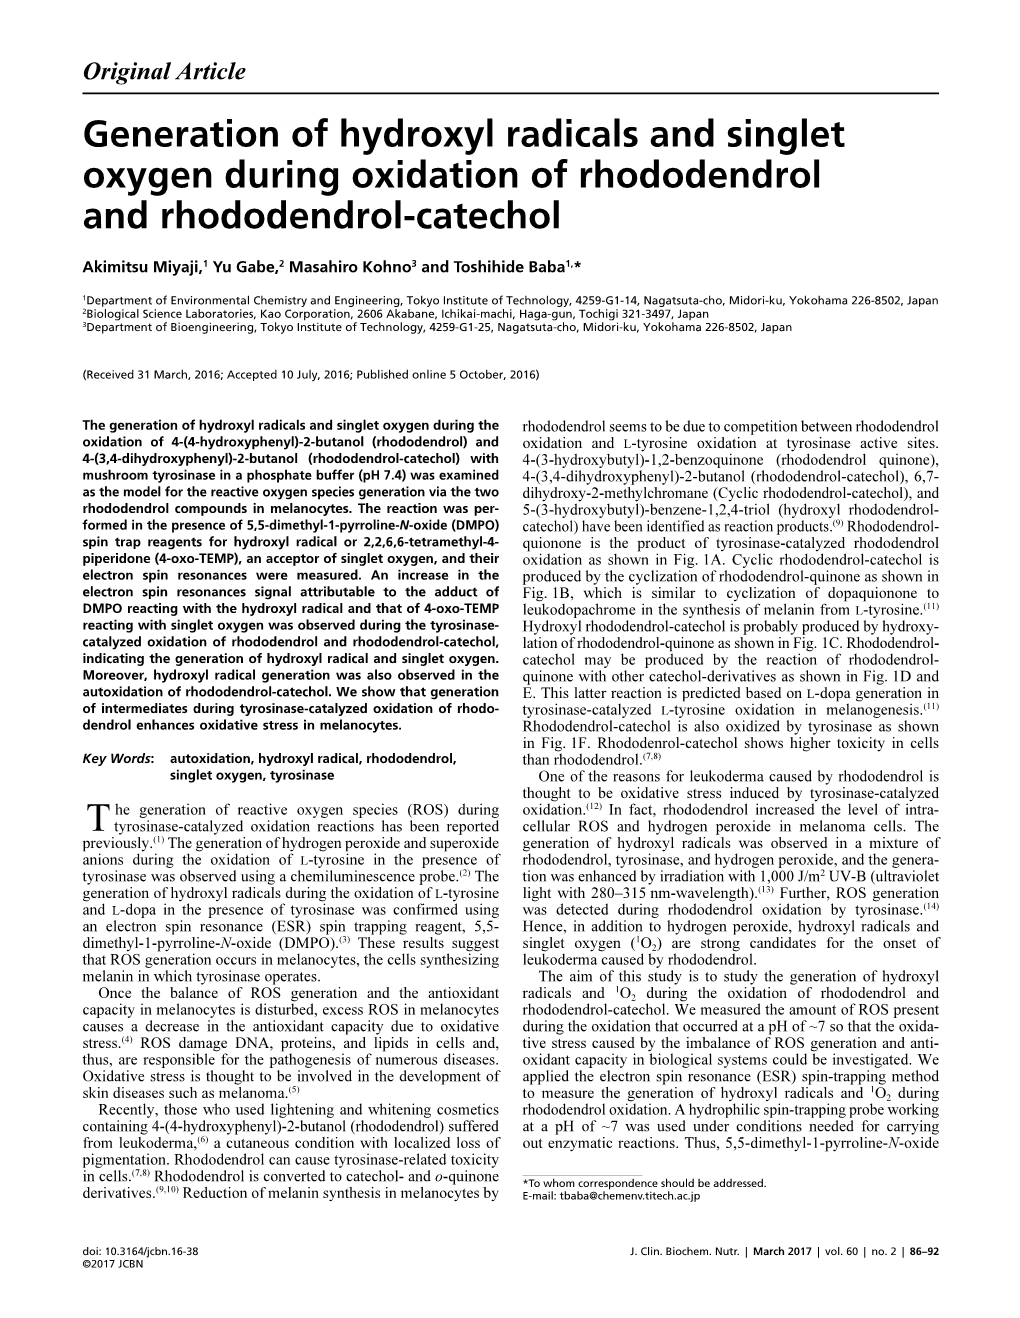 Generation of Hydroxyl Radicals and Singlet Oxygen During Oxidation Of